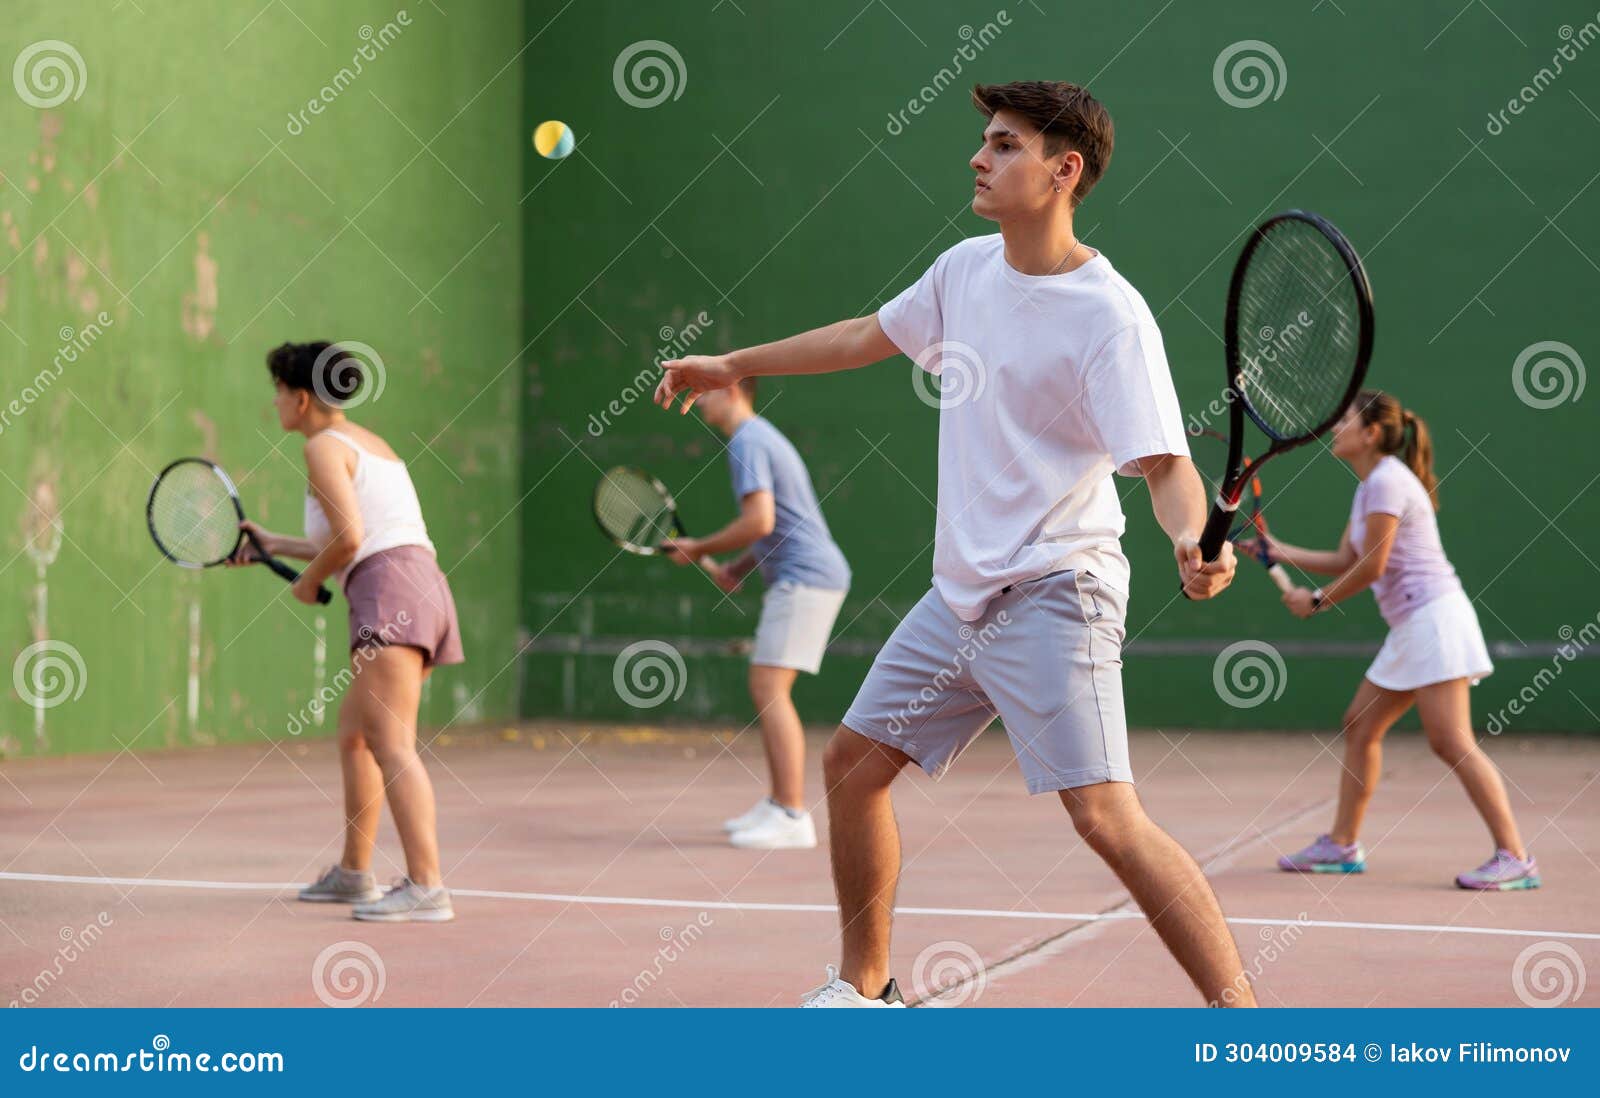 young male pelota player hitting ball with racket